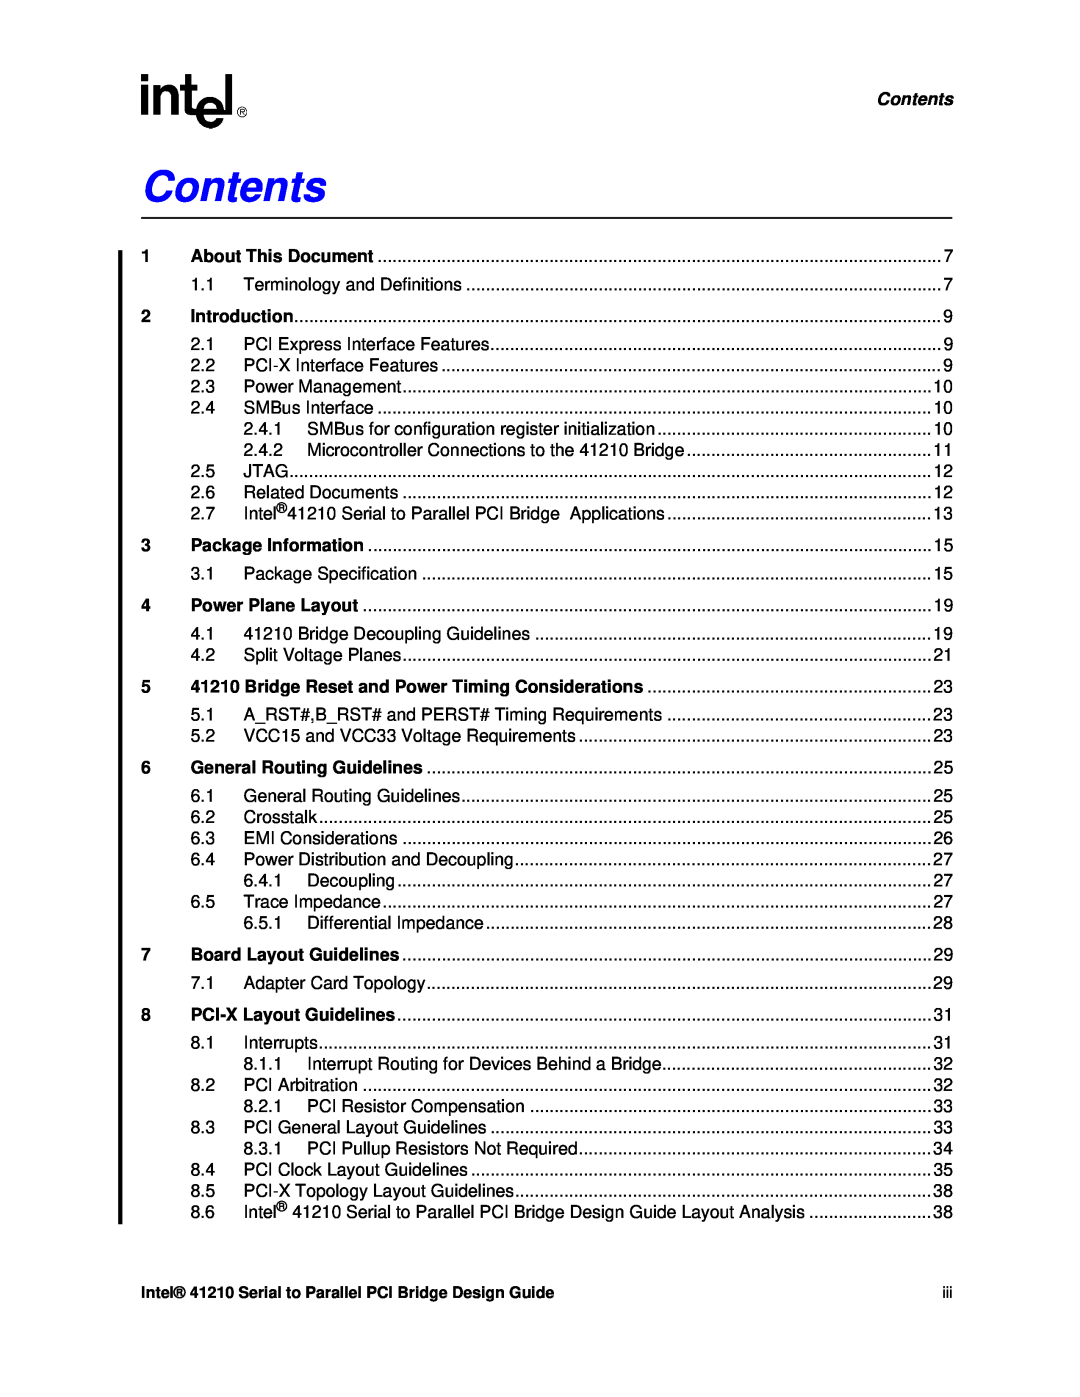 Intel 41210 manual Contents, Introduction 